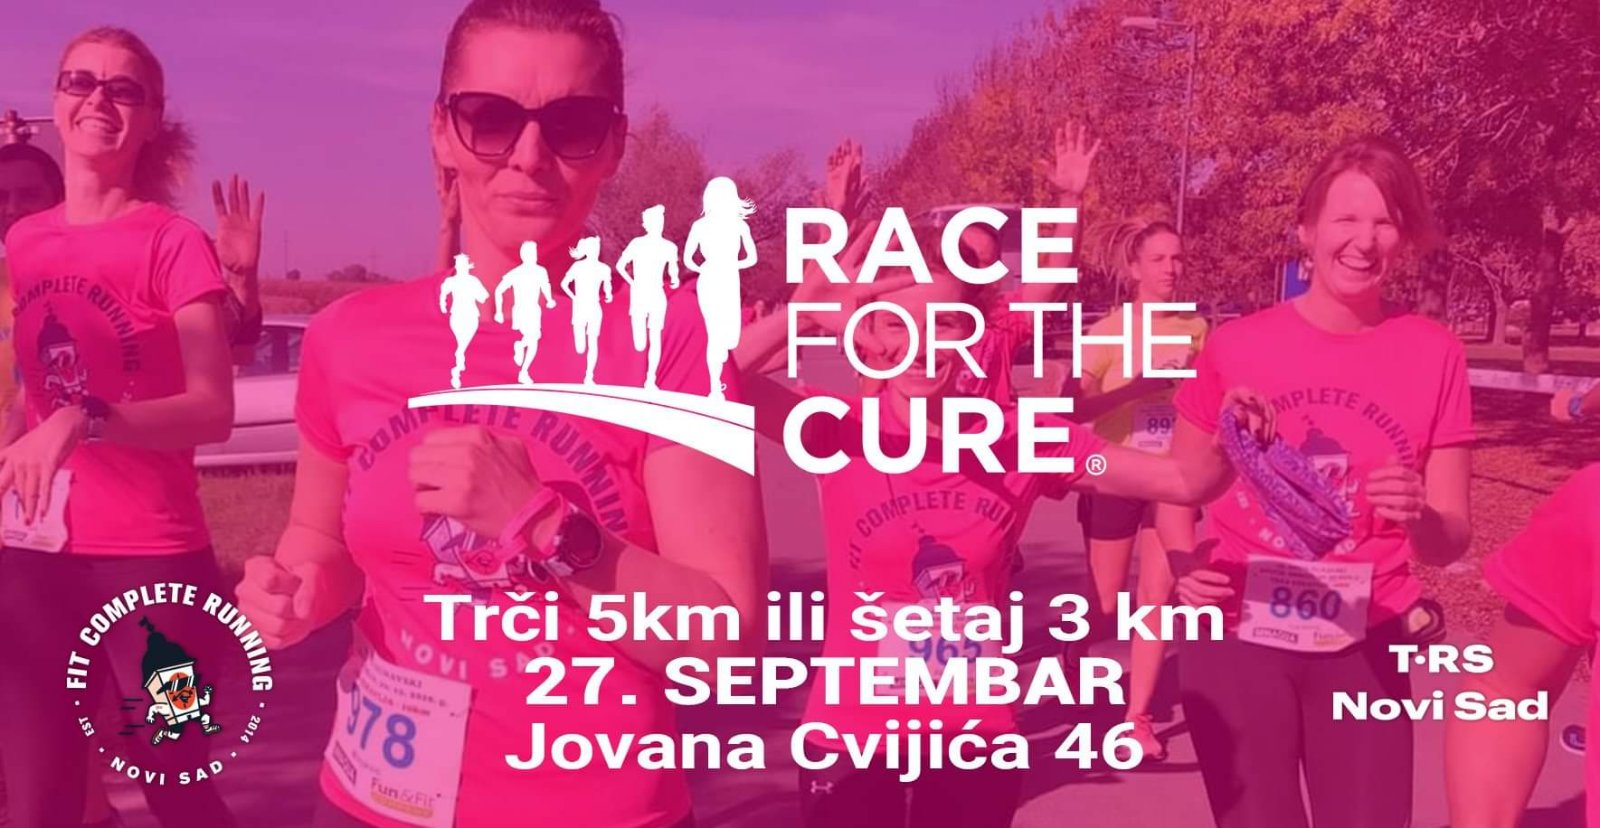 Race for the Cure®